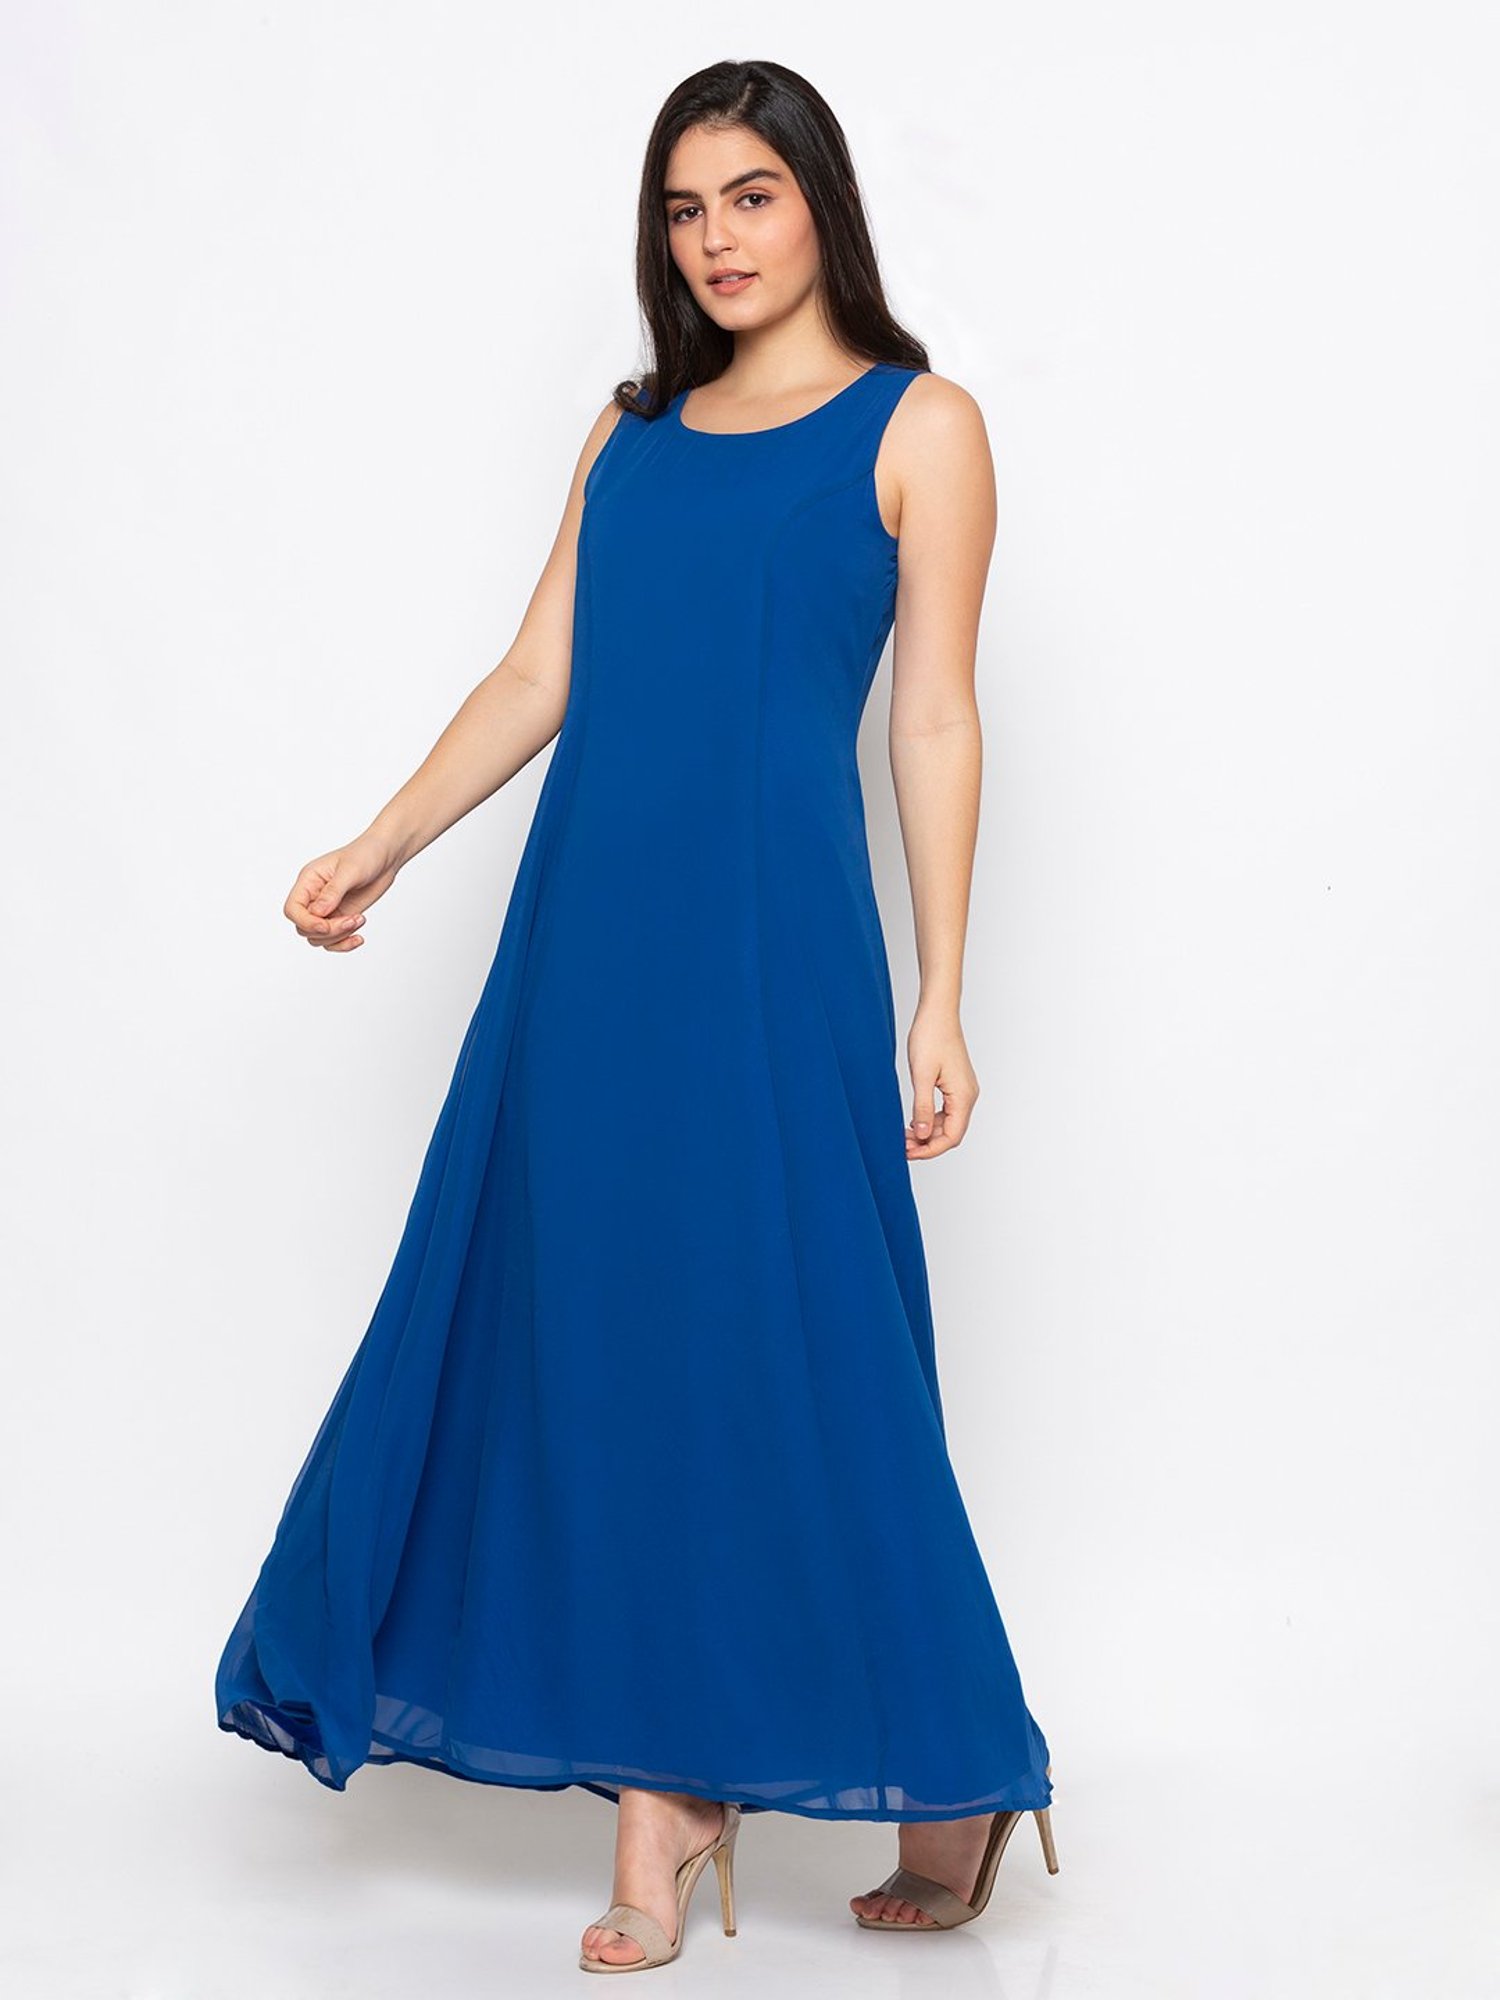 Long Blue Prom Dress with Puff Sleeves - PromGirl